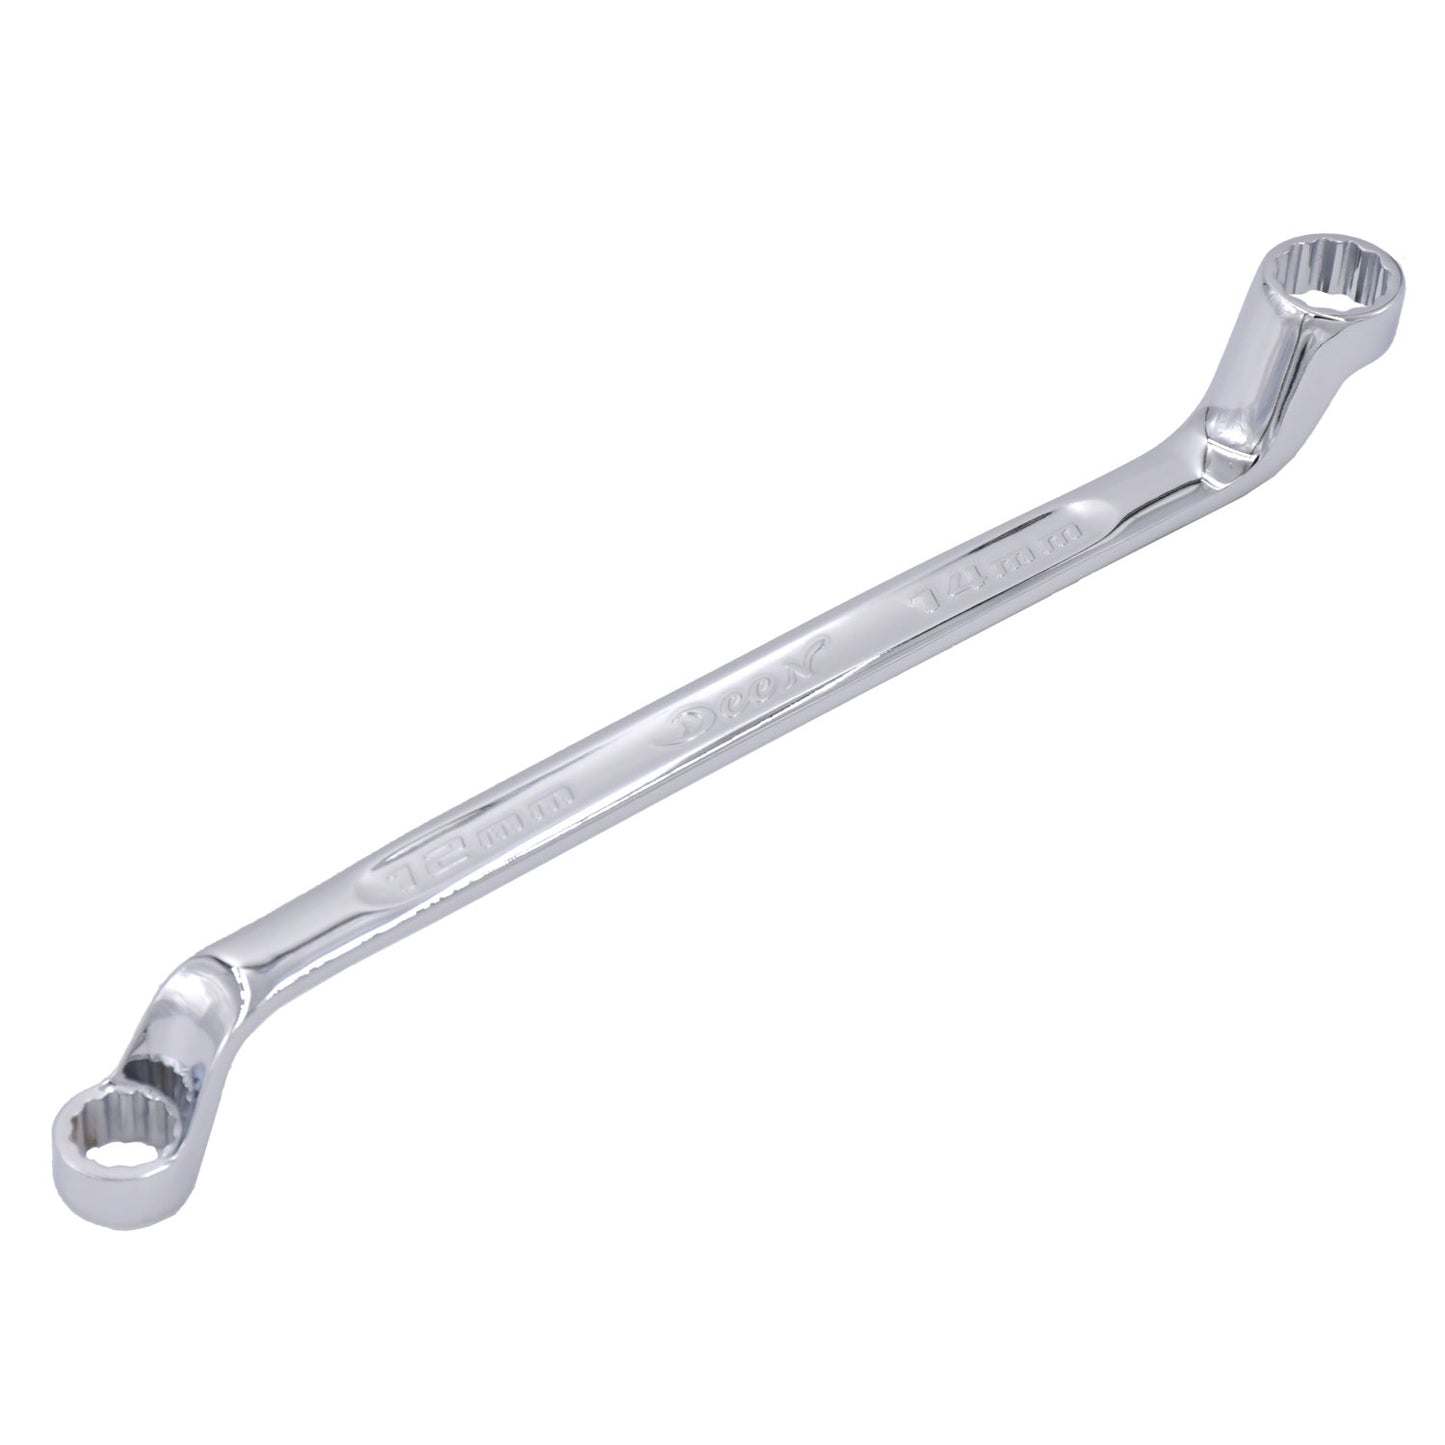 DEEN 75 degree offset glasses wrench